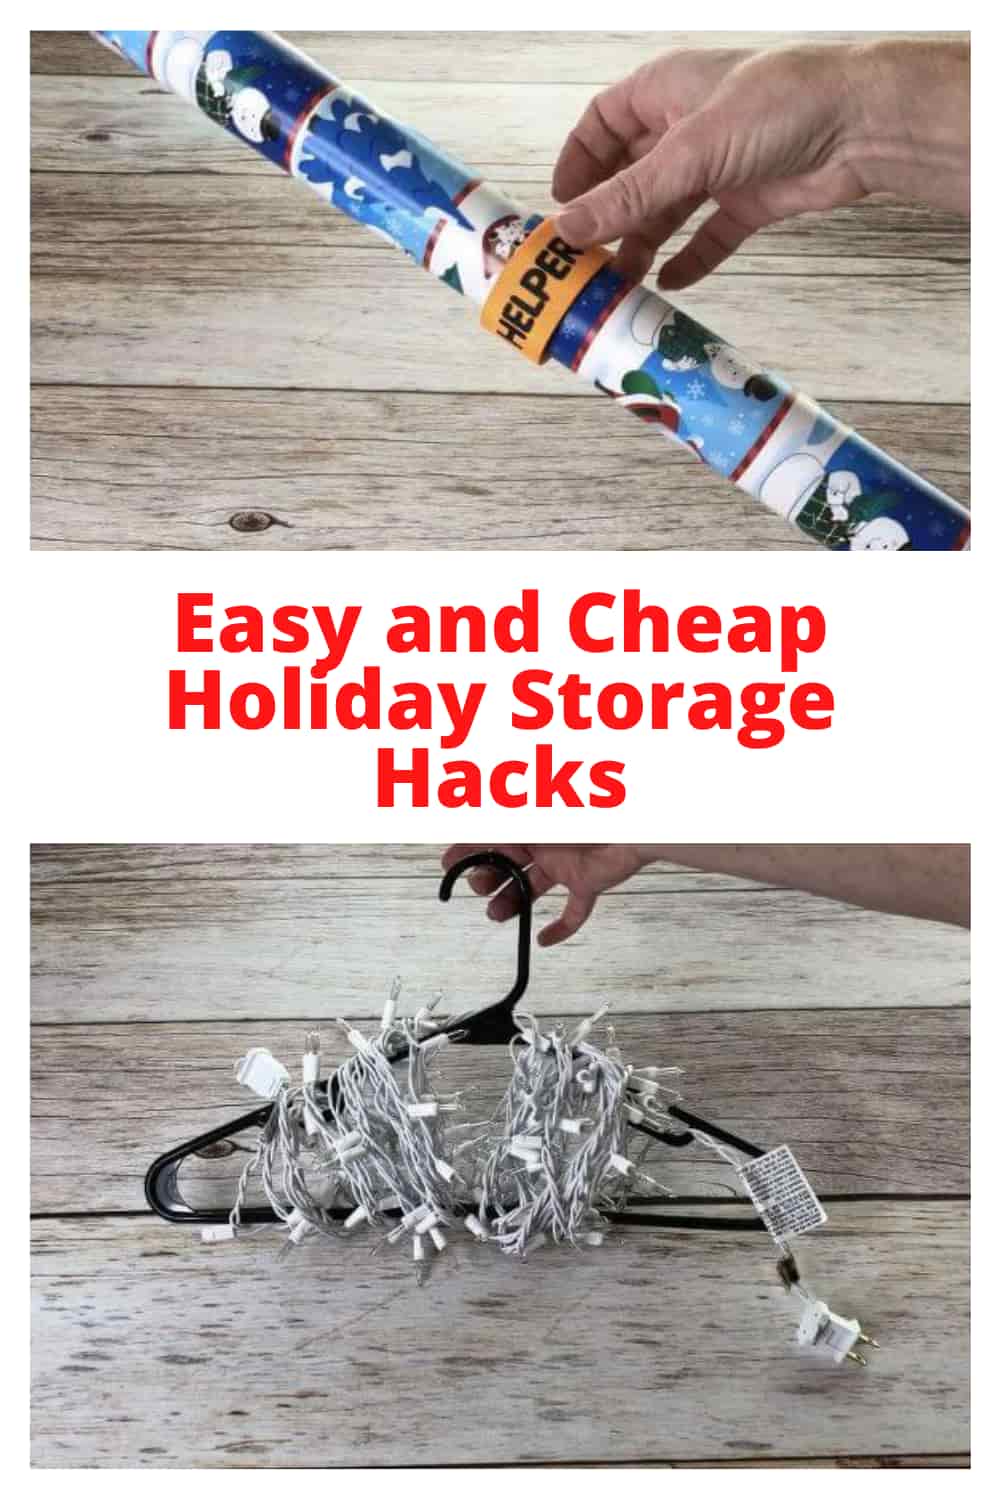 How To Store Christmas Decorations: Holiday Storage Ideas and Hacks with Video